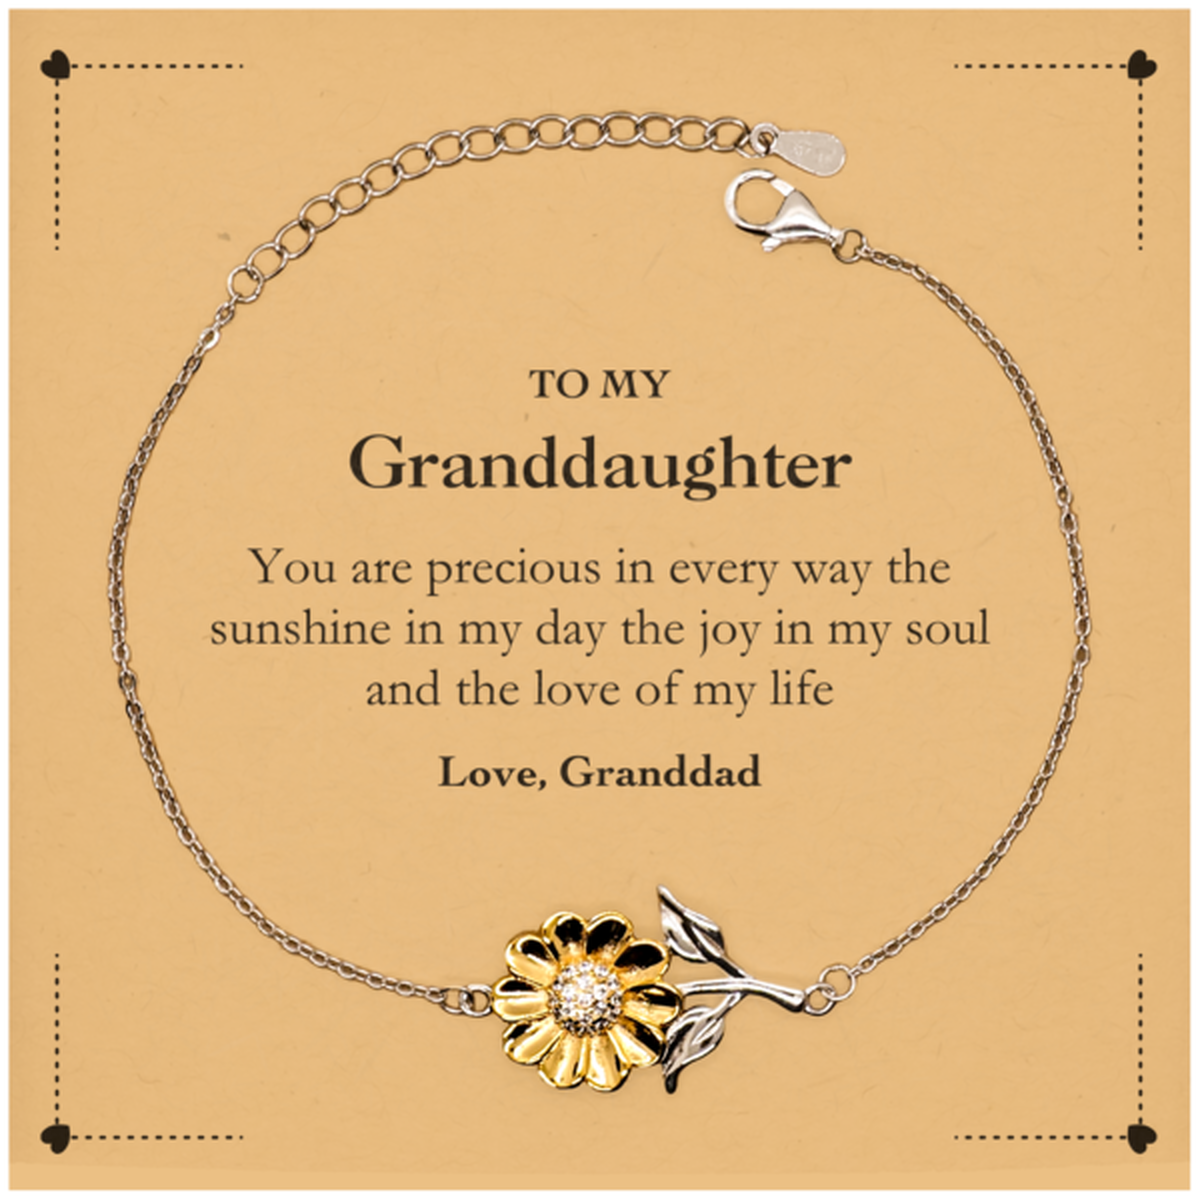 Graduation Gifts for Granddaughter Sunflower Bracelet Present from Granddad, Christmas Granddaughter Birthday Gifts Granddaughter You are precious in every way the sunshine in my day. Love, Granddad